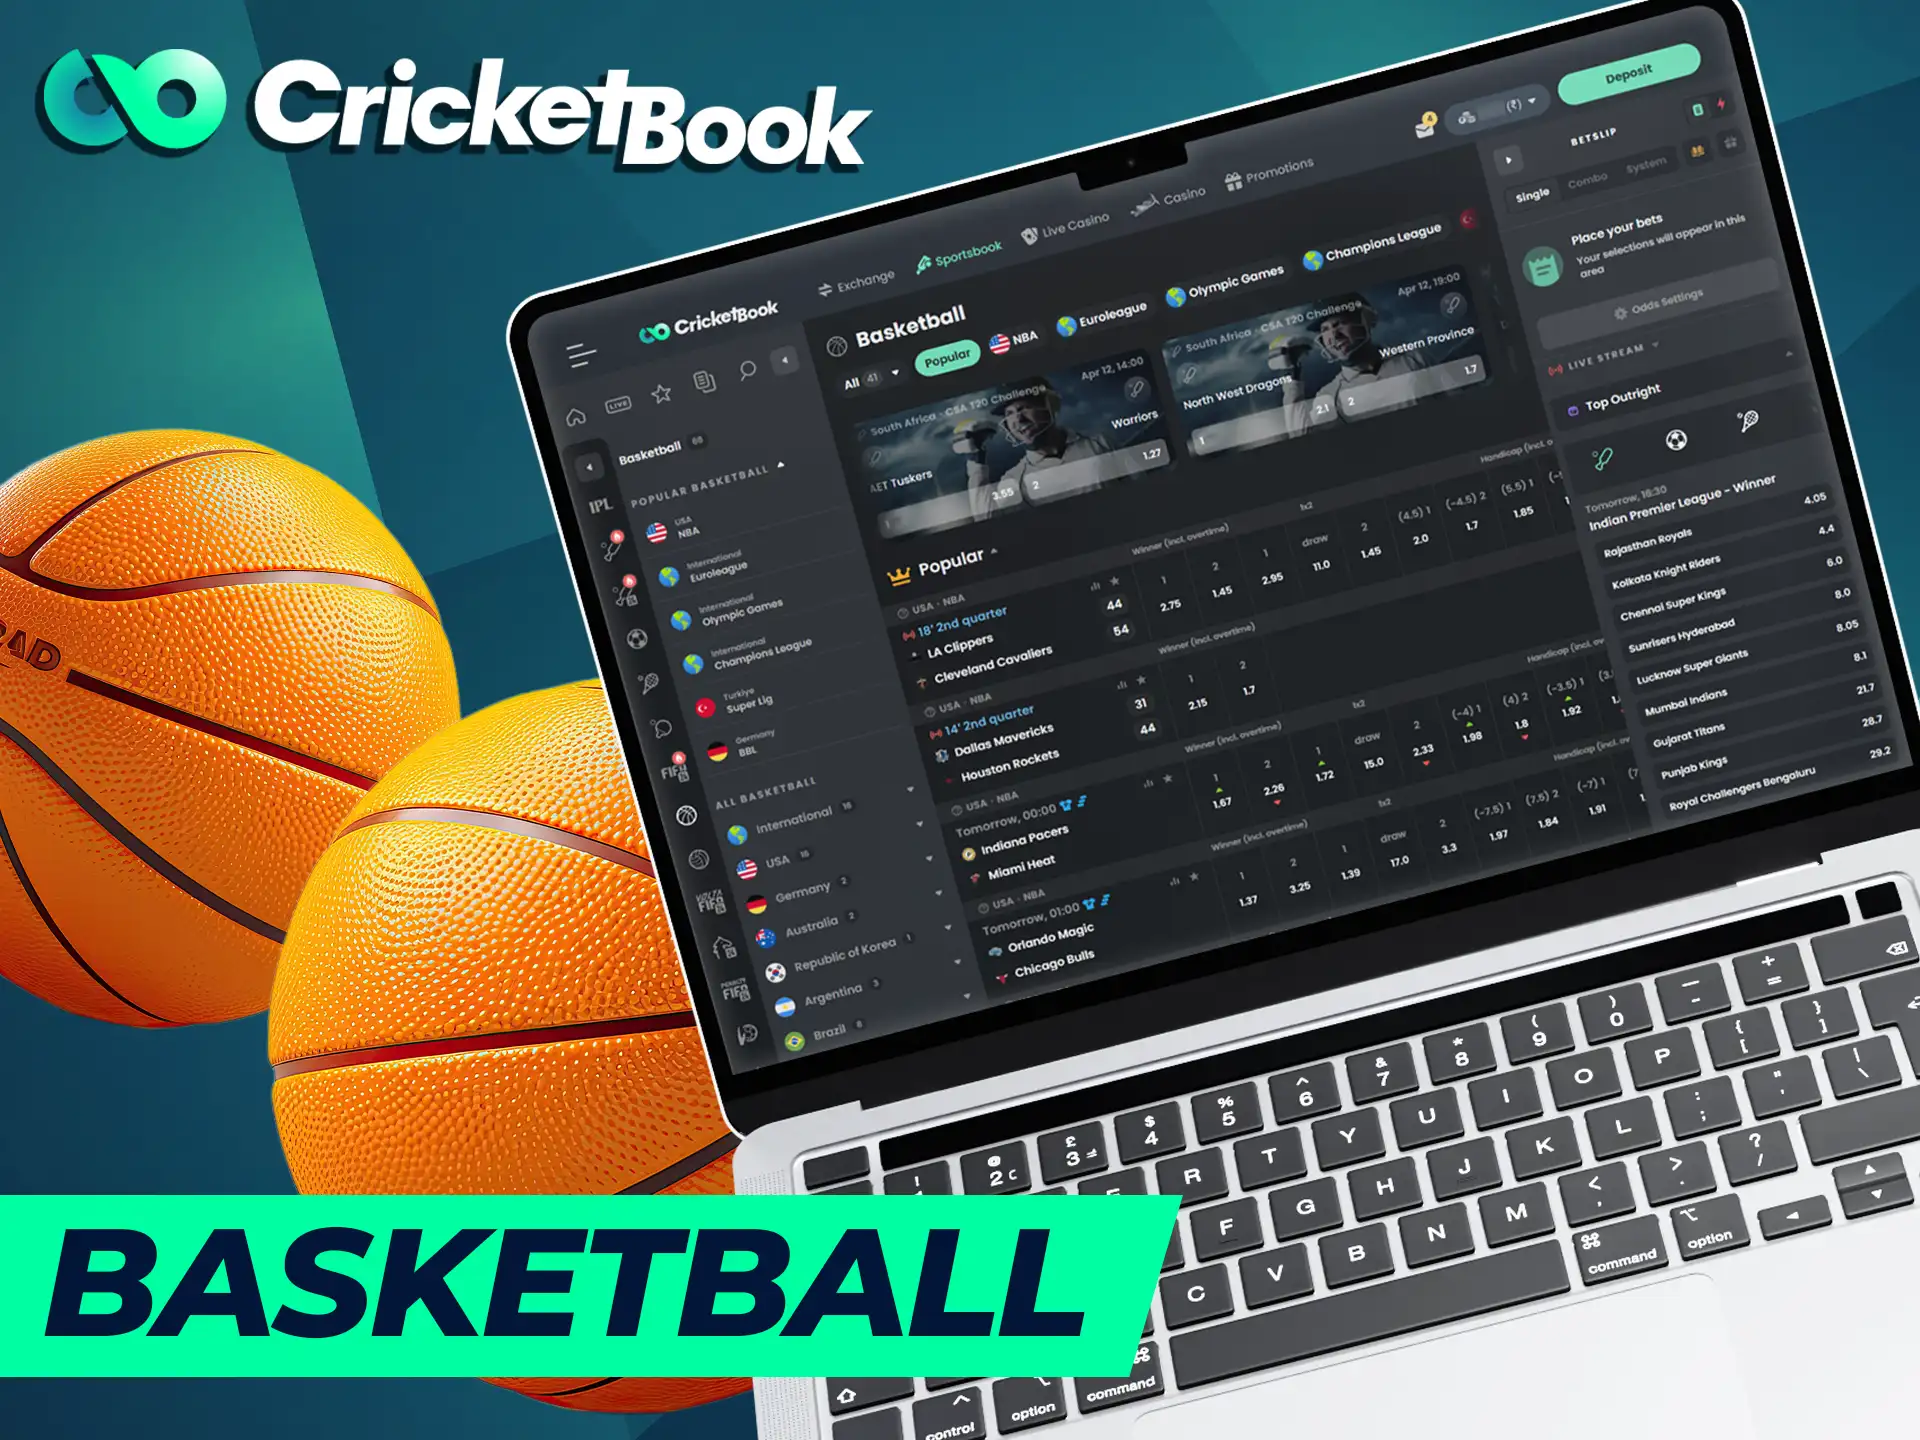 CricketBook offers a wide range of basketball events.